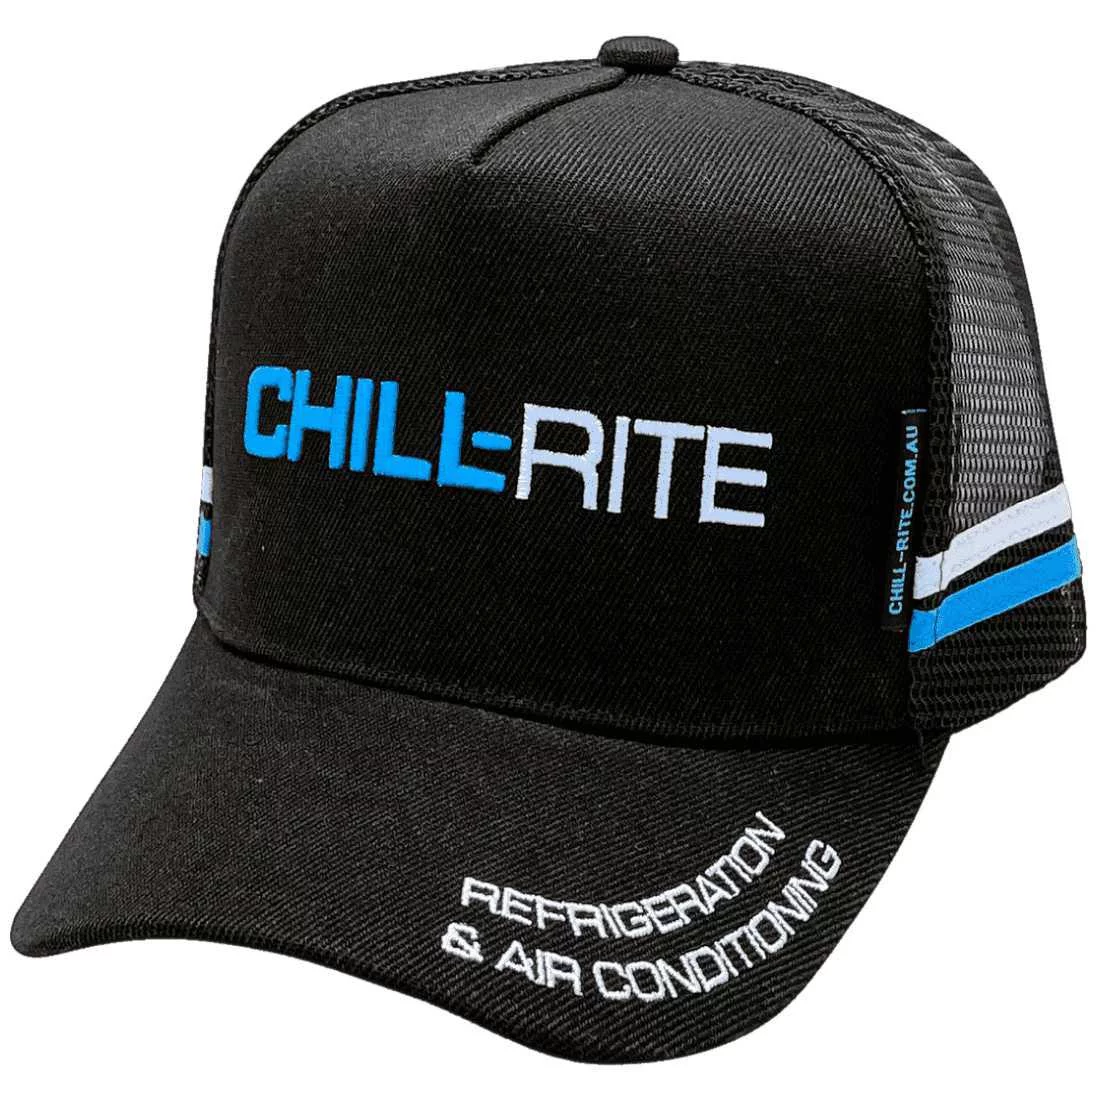 Chill-Rite Refrigeration & Air Conditioning Dubbo HP Original Midrange Aussie Trucker Hats with double side bands Acrylic -Black Whit Aqua